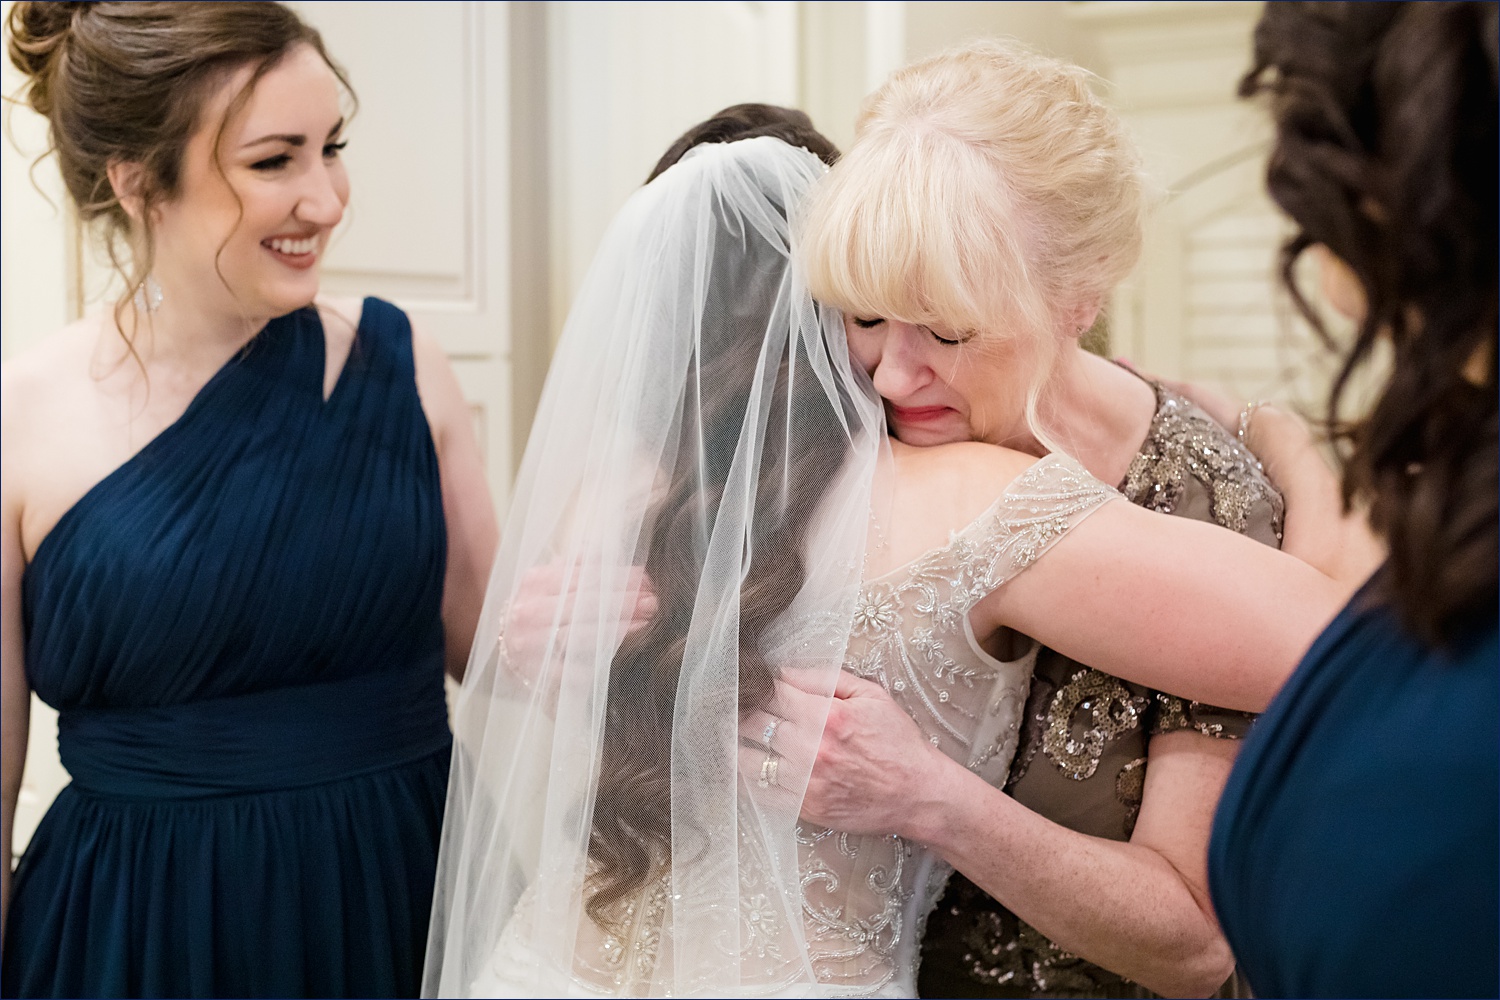 The mother of the bride tears up seeing her daughter all dressed for her NH wedding day